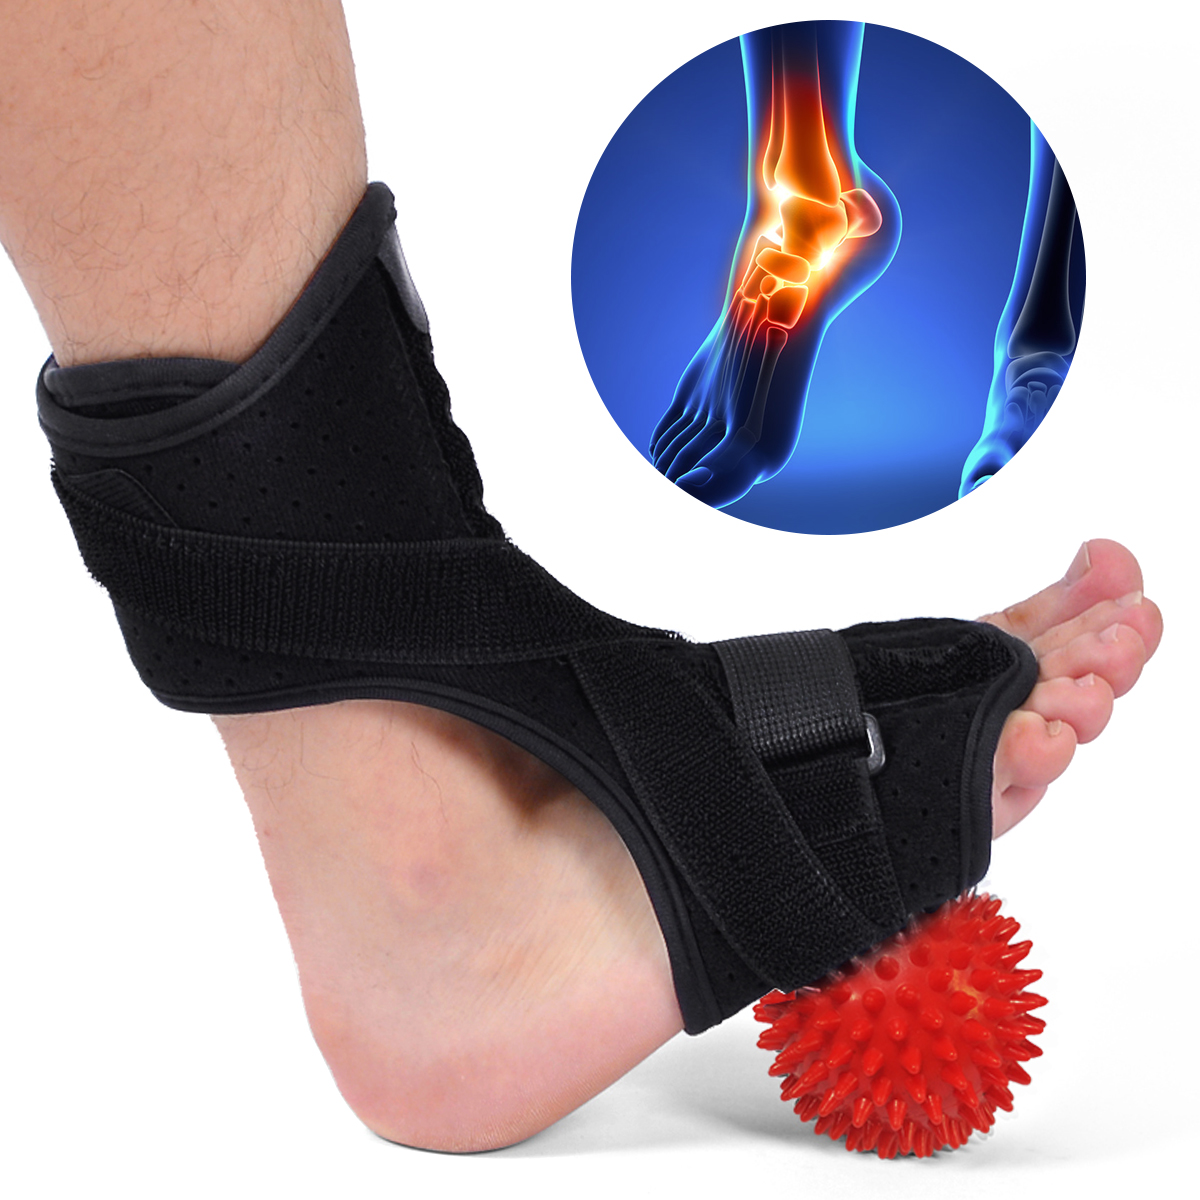 

Plantar Fasciitis Night Splint Drop Foot Orthotic Brace with Hard Spiky Massage Ball for Effective Relief from Achilles